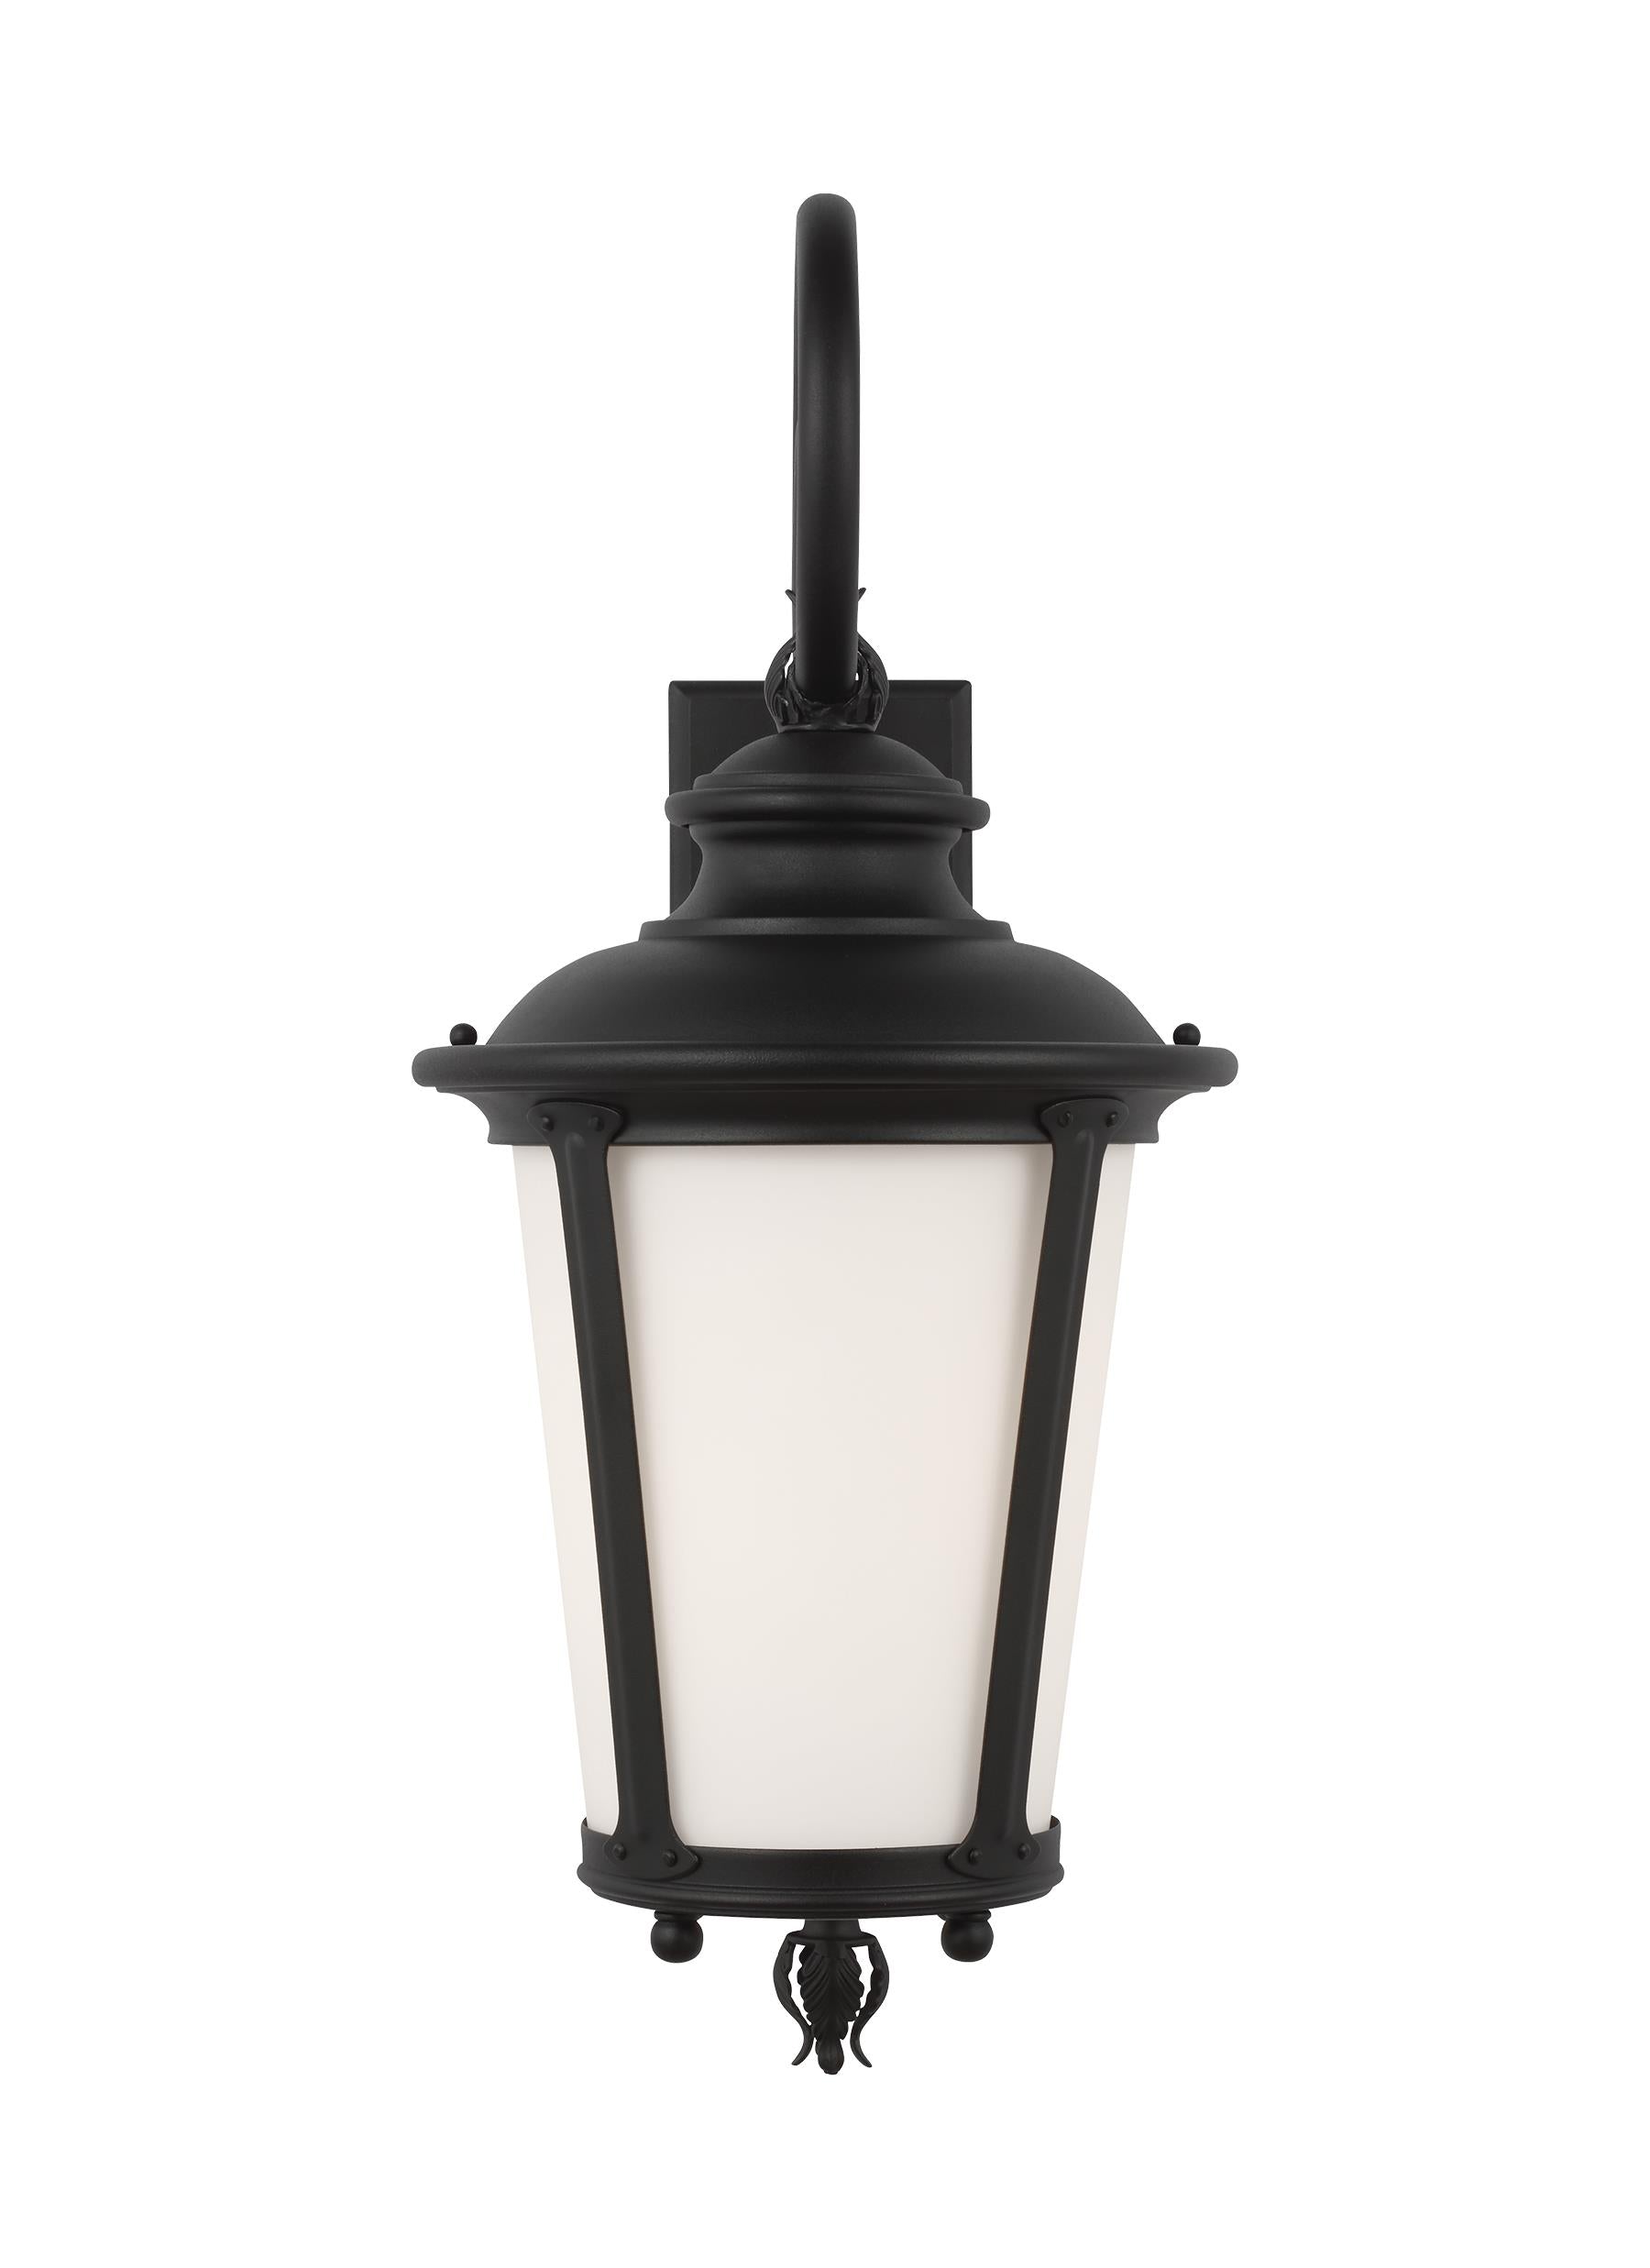 Cape May traditional 1-light outdoor exterior large wall lantern sconce in black finish with etched white glass shade